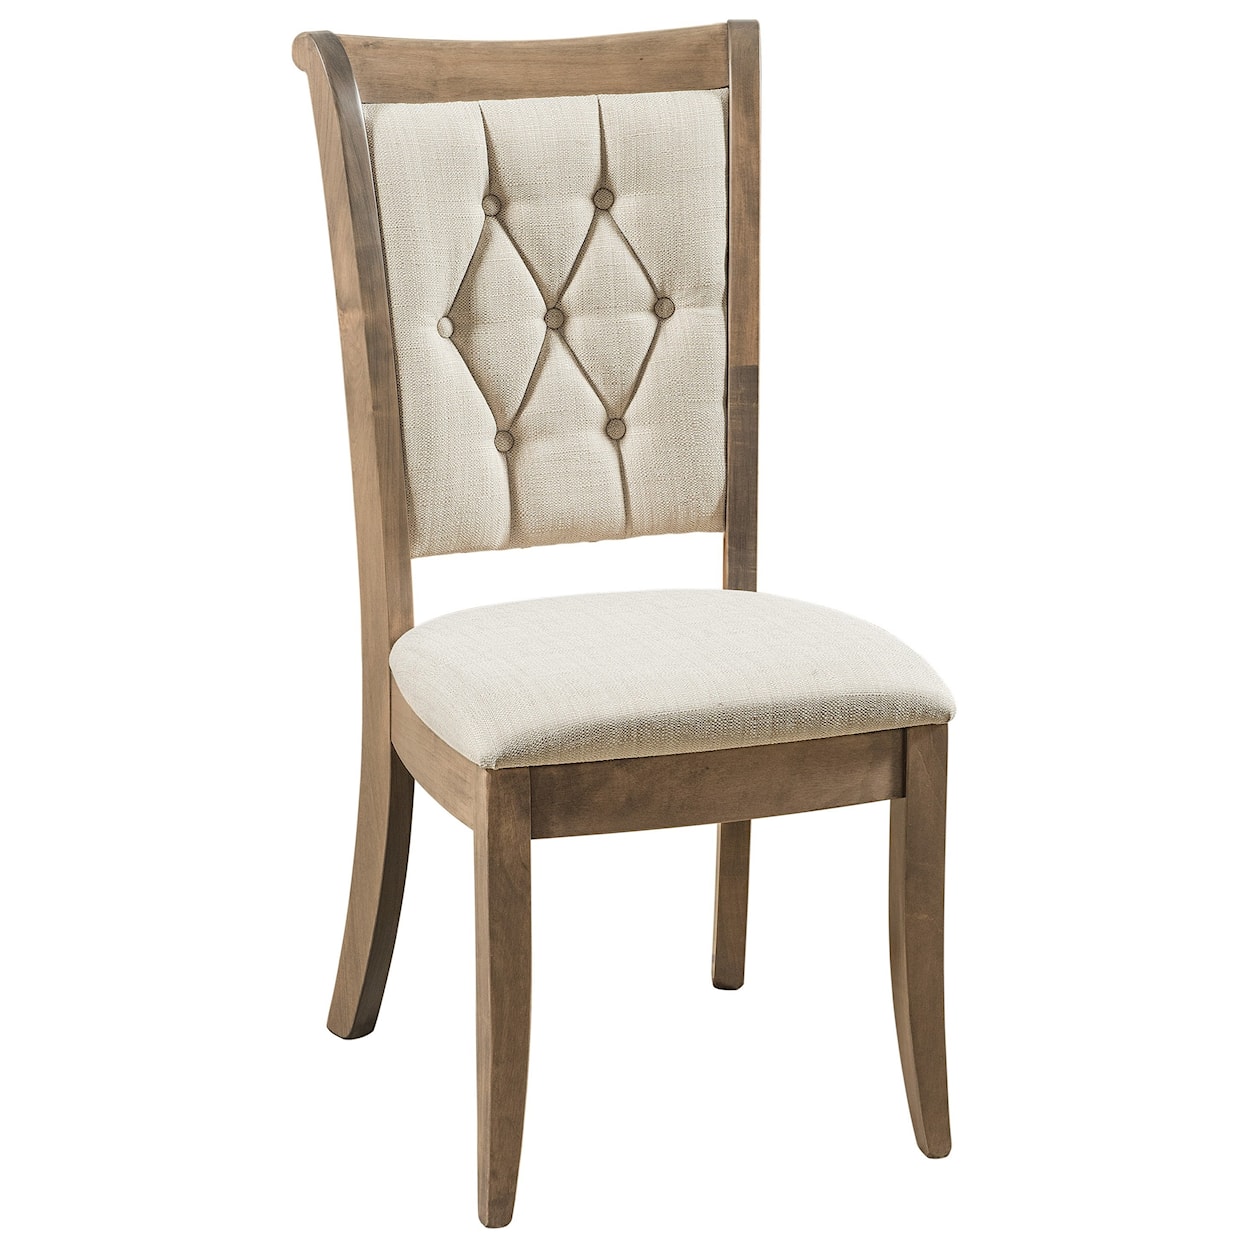 F&N Woodworking Chelsea Side Chair - Fabric Seat